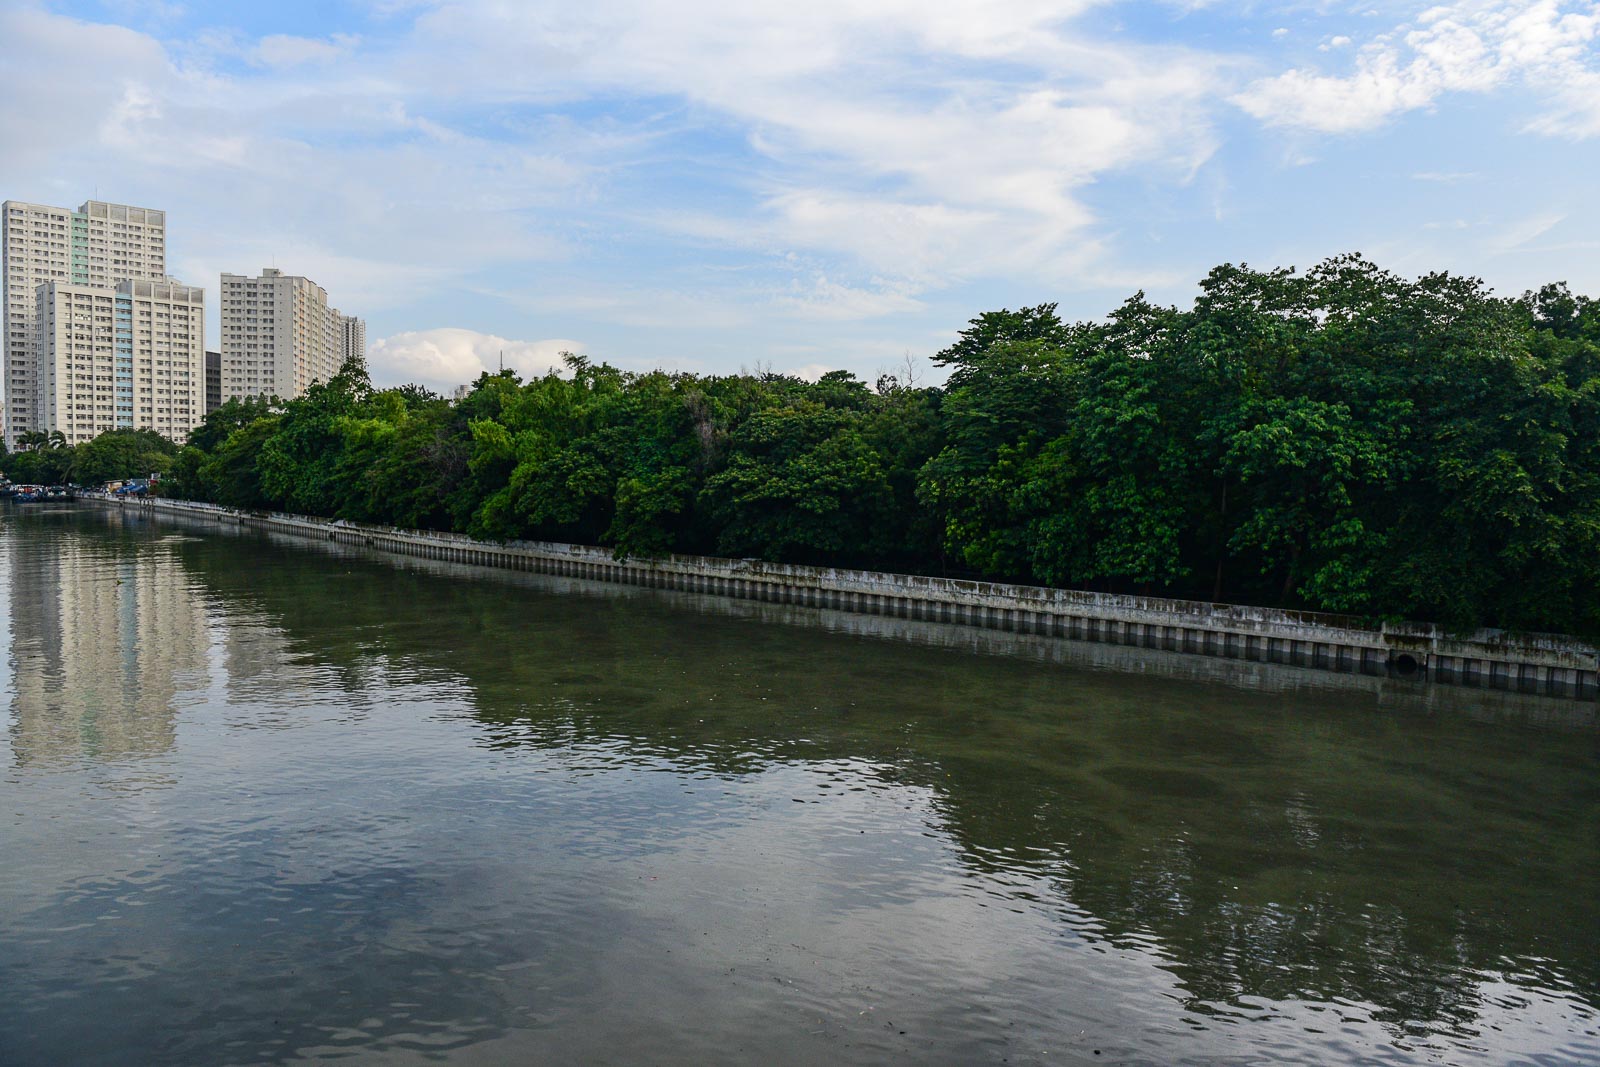 FROM THE OUTSIDE. The Arroceros Forest Park as seen from the Pasig River. Photo by LeAnne Jazul/Rappler 